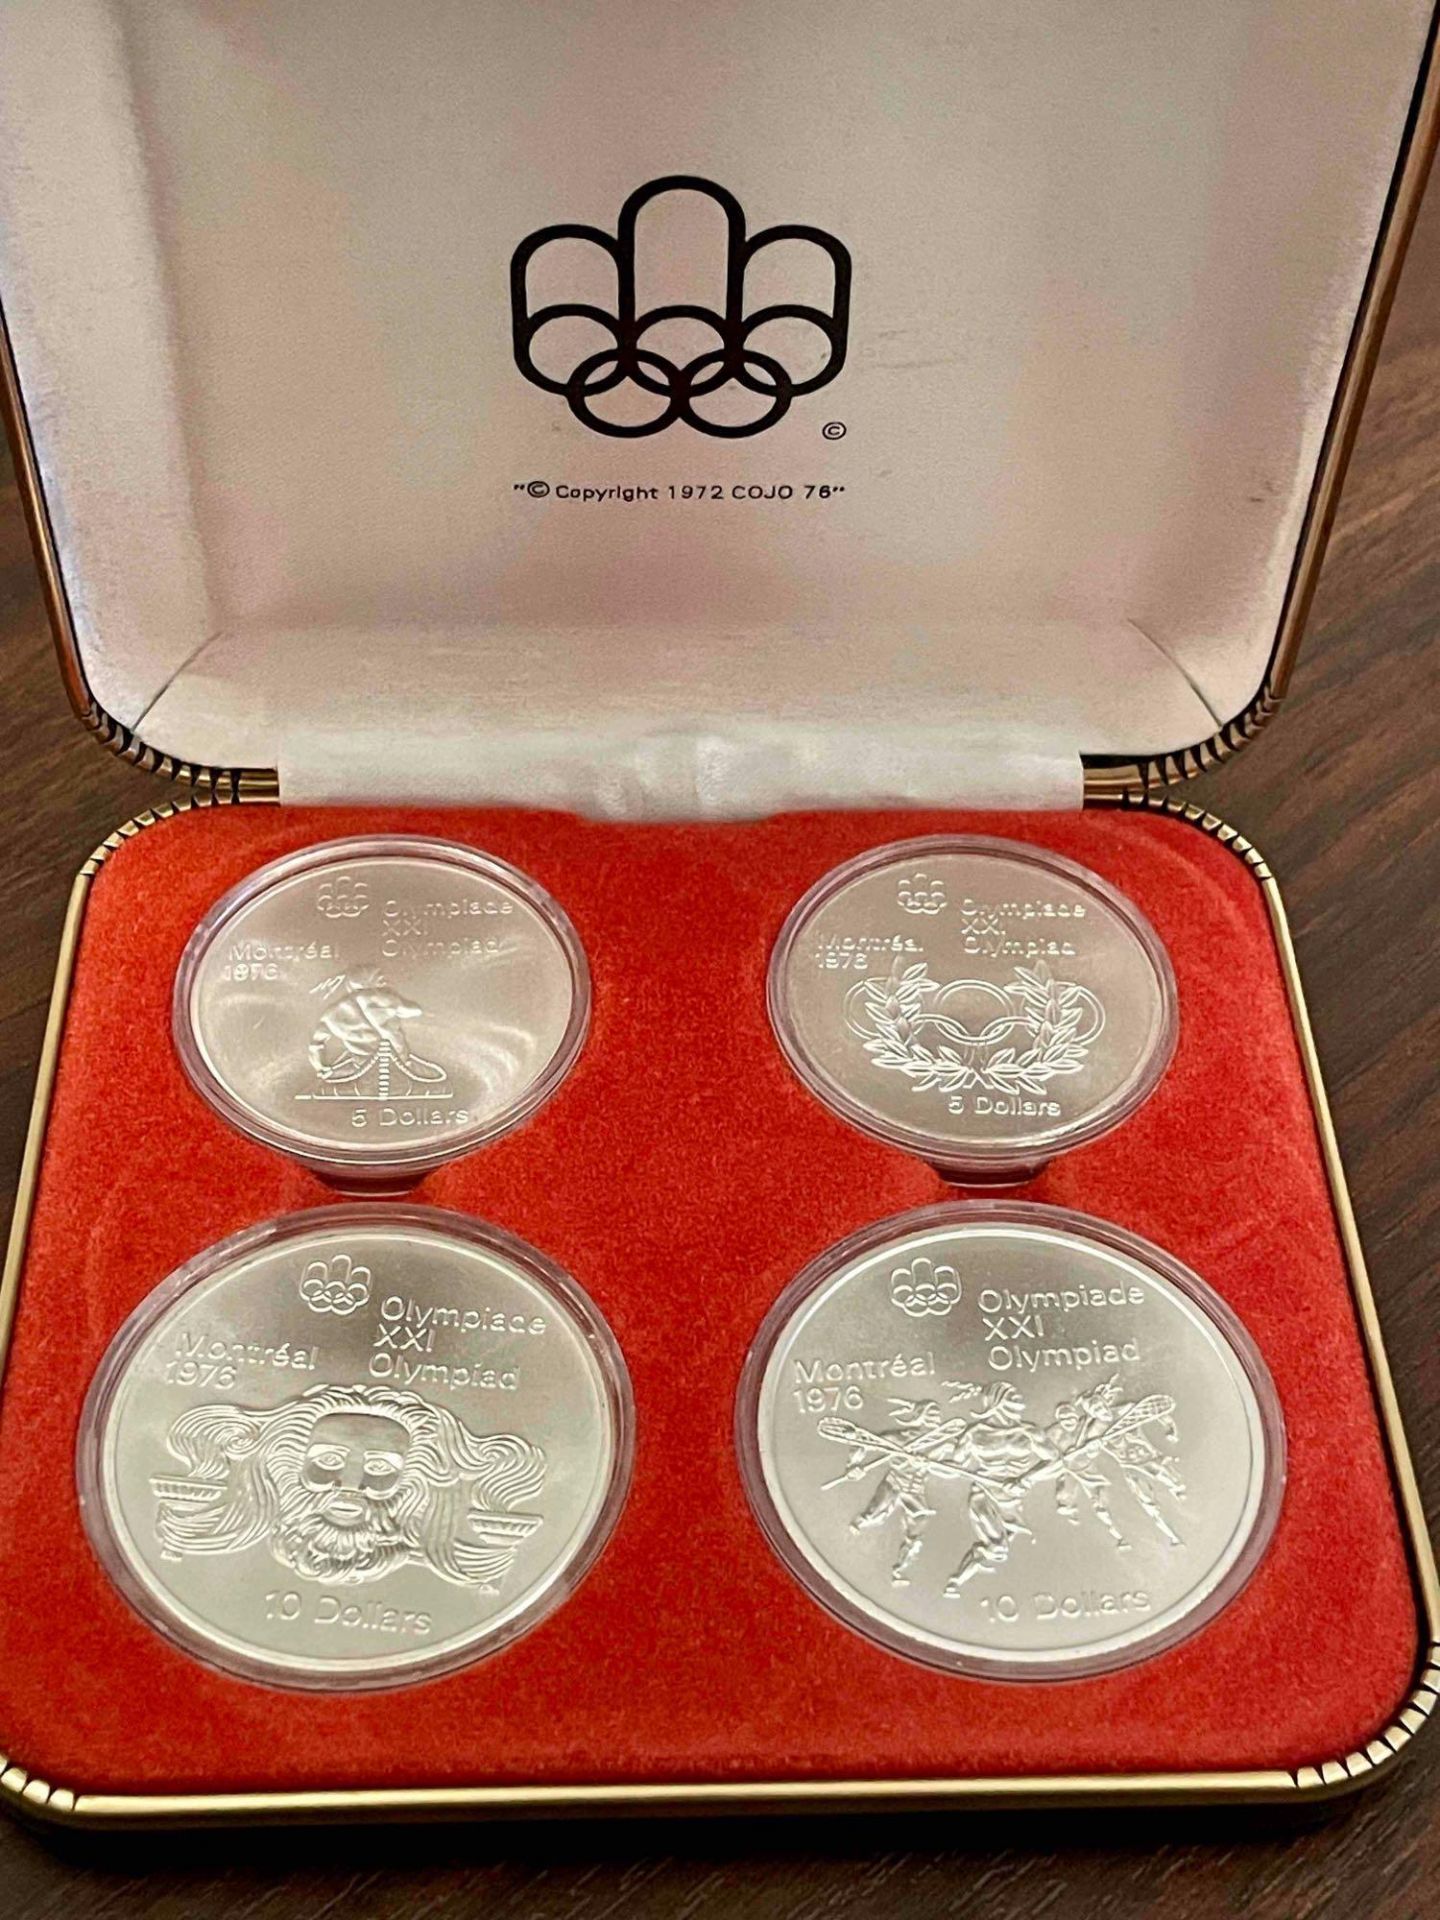 1976 Canada Montreal Olympics 4 Silver Coin Set, 4.3362 total oz - Image 2 of 4